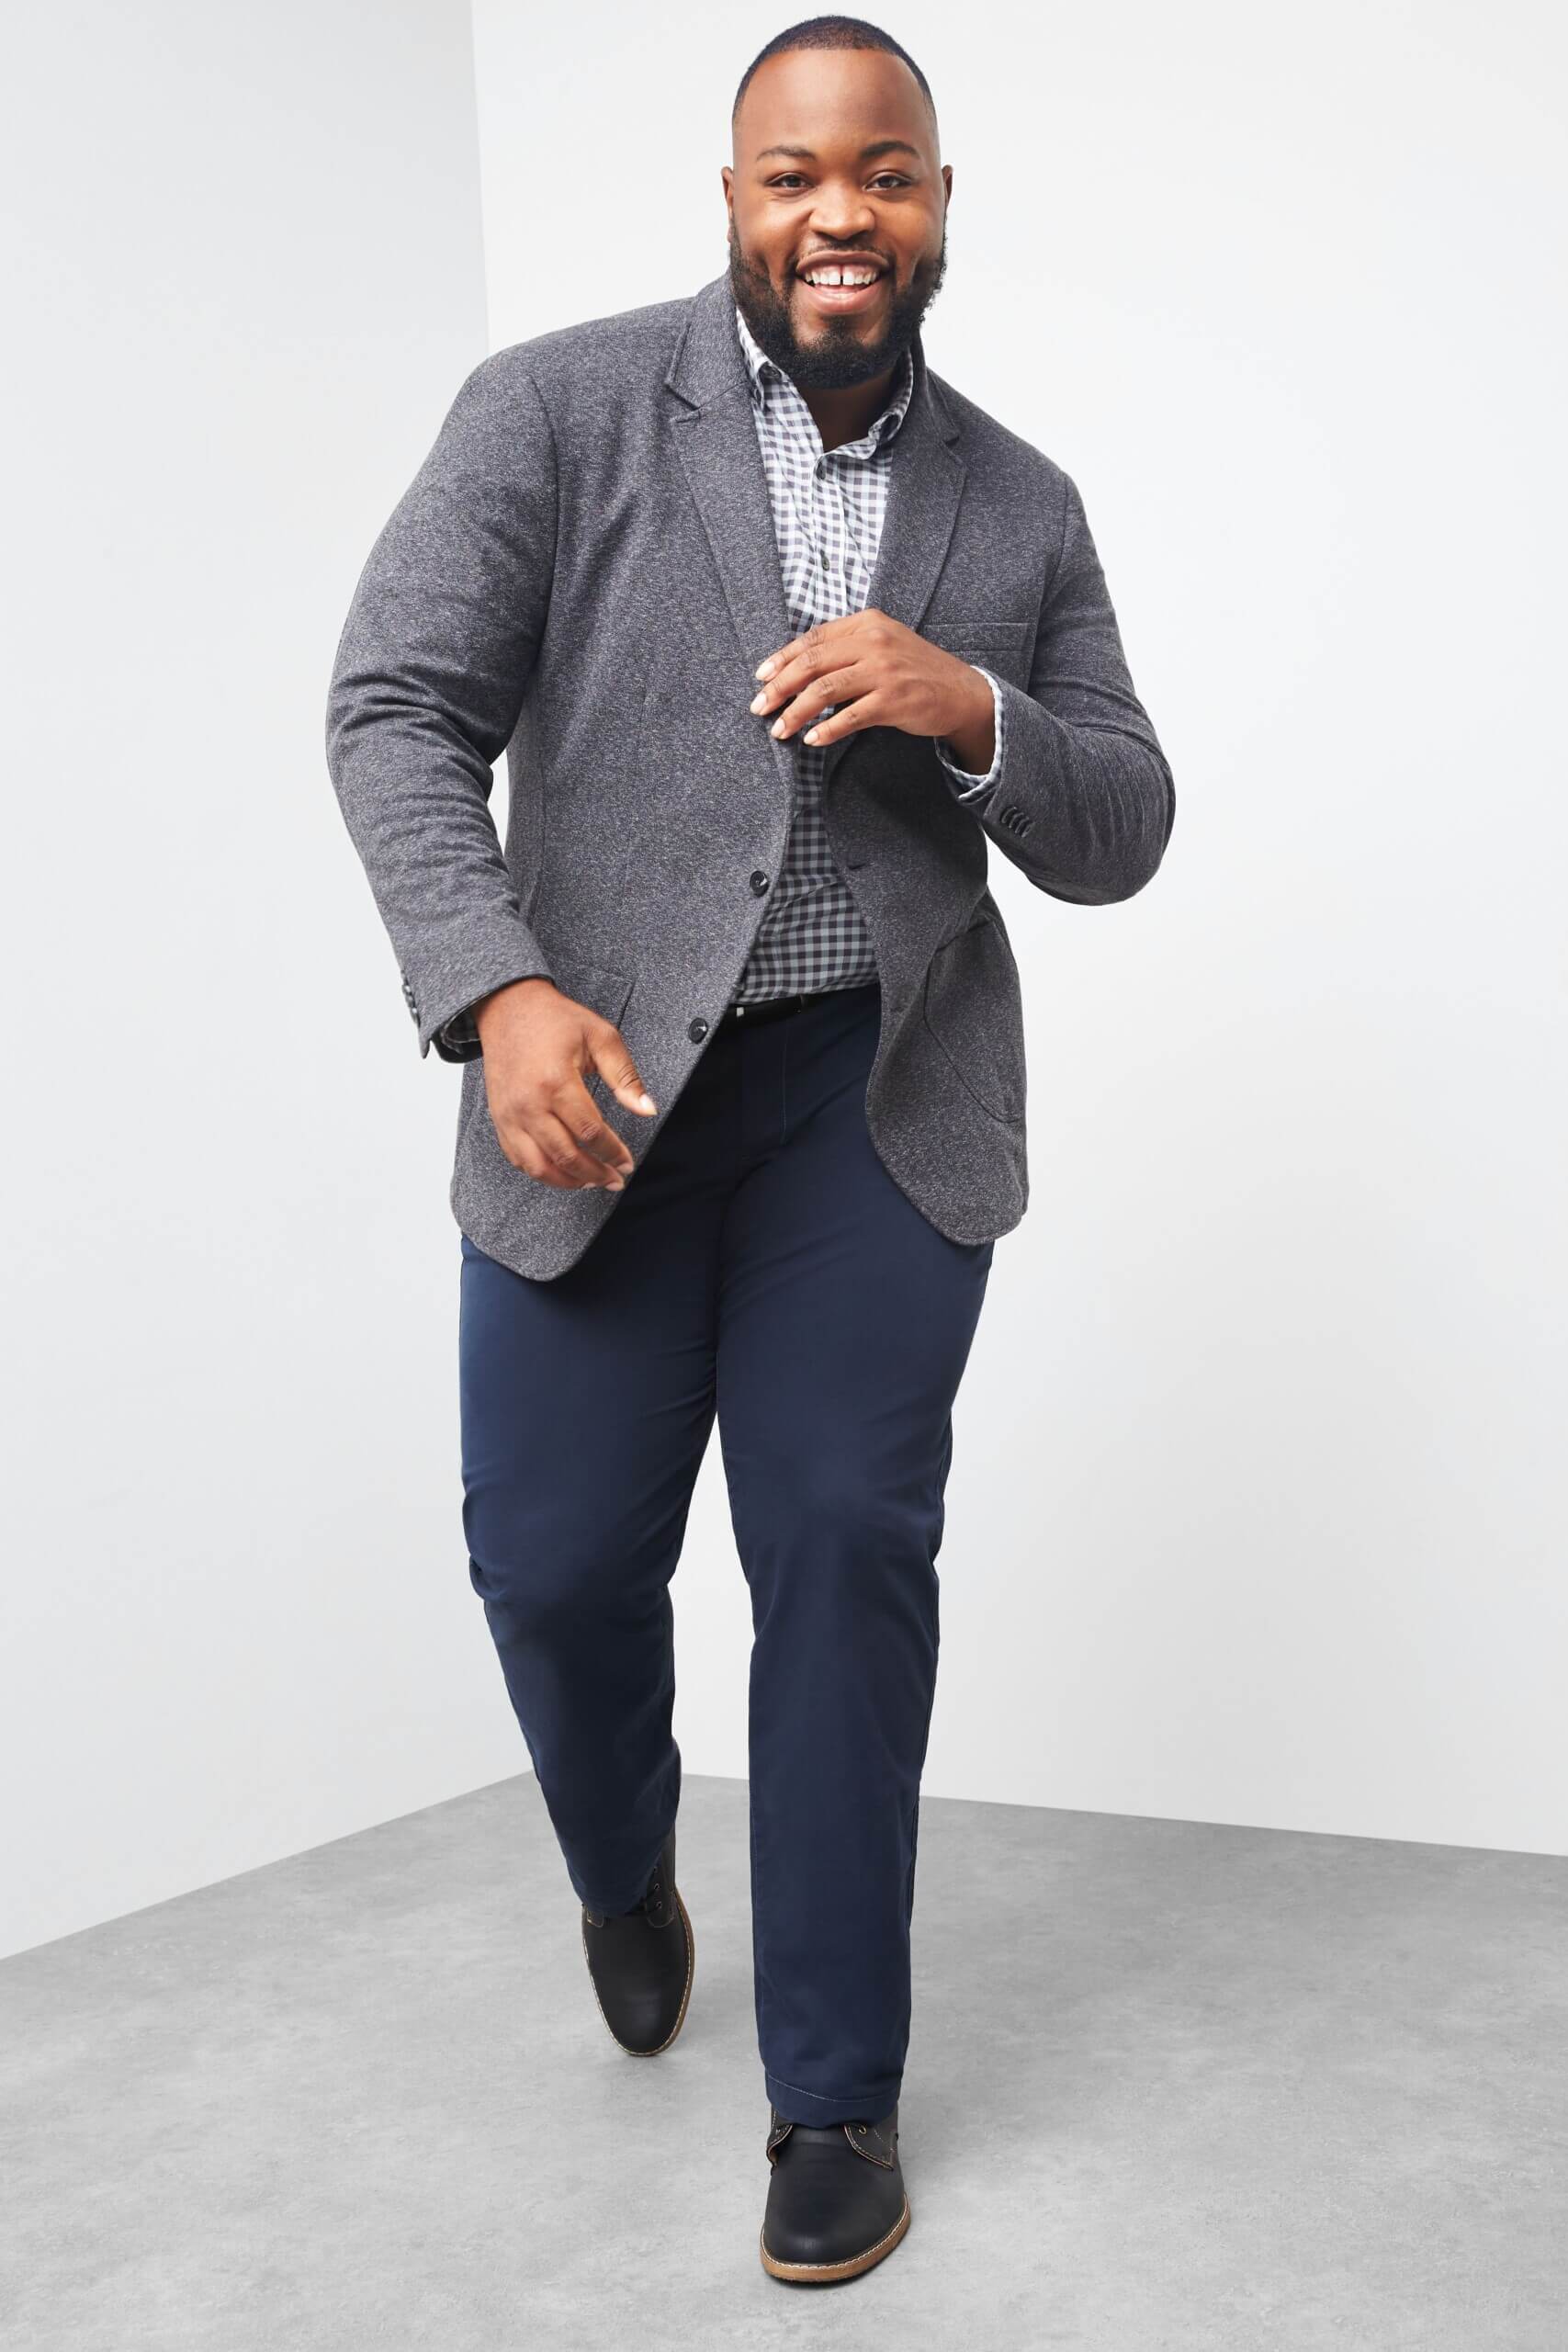 Stitch Fix men's model wearing graduation outfit featuring a grey sport coat, blue-patterned button-down, navy blue pants and black shoes.